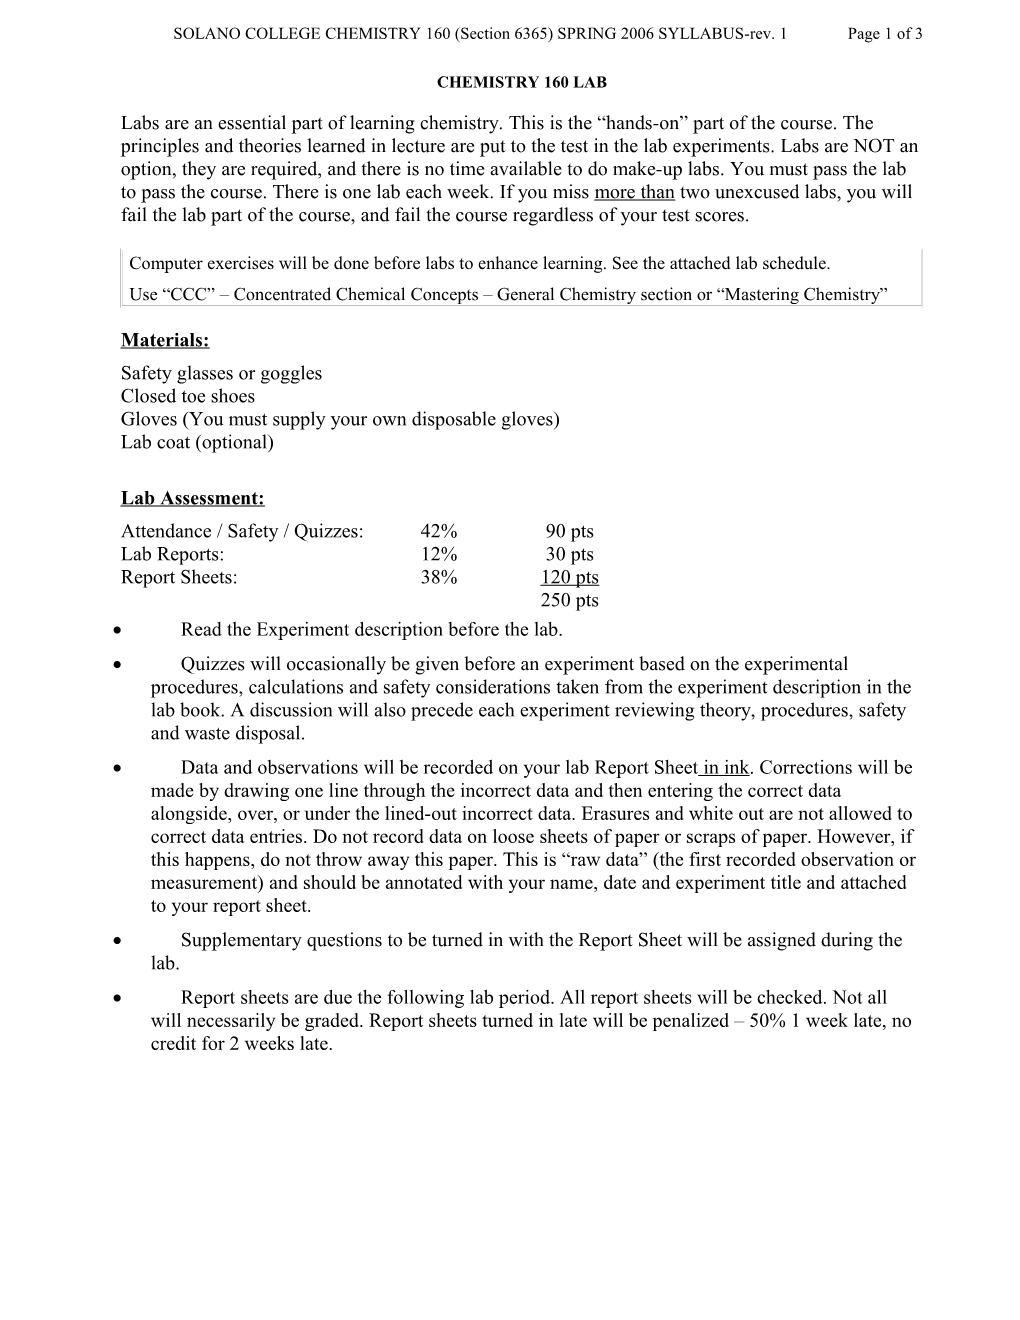 SOLANO COLLEGE CHEMISTRY 160 (Section 6365) SPRING 2006 SYLLABUS-Rev. 1Page 1 of 3